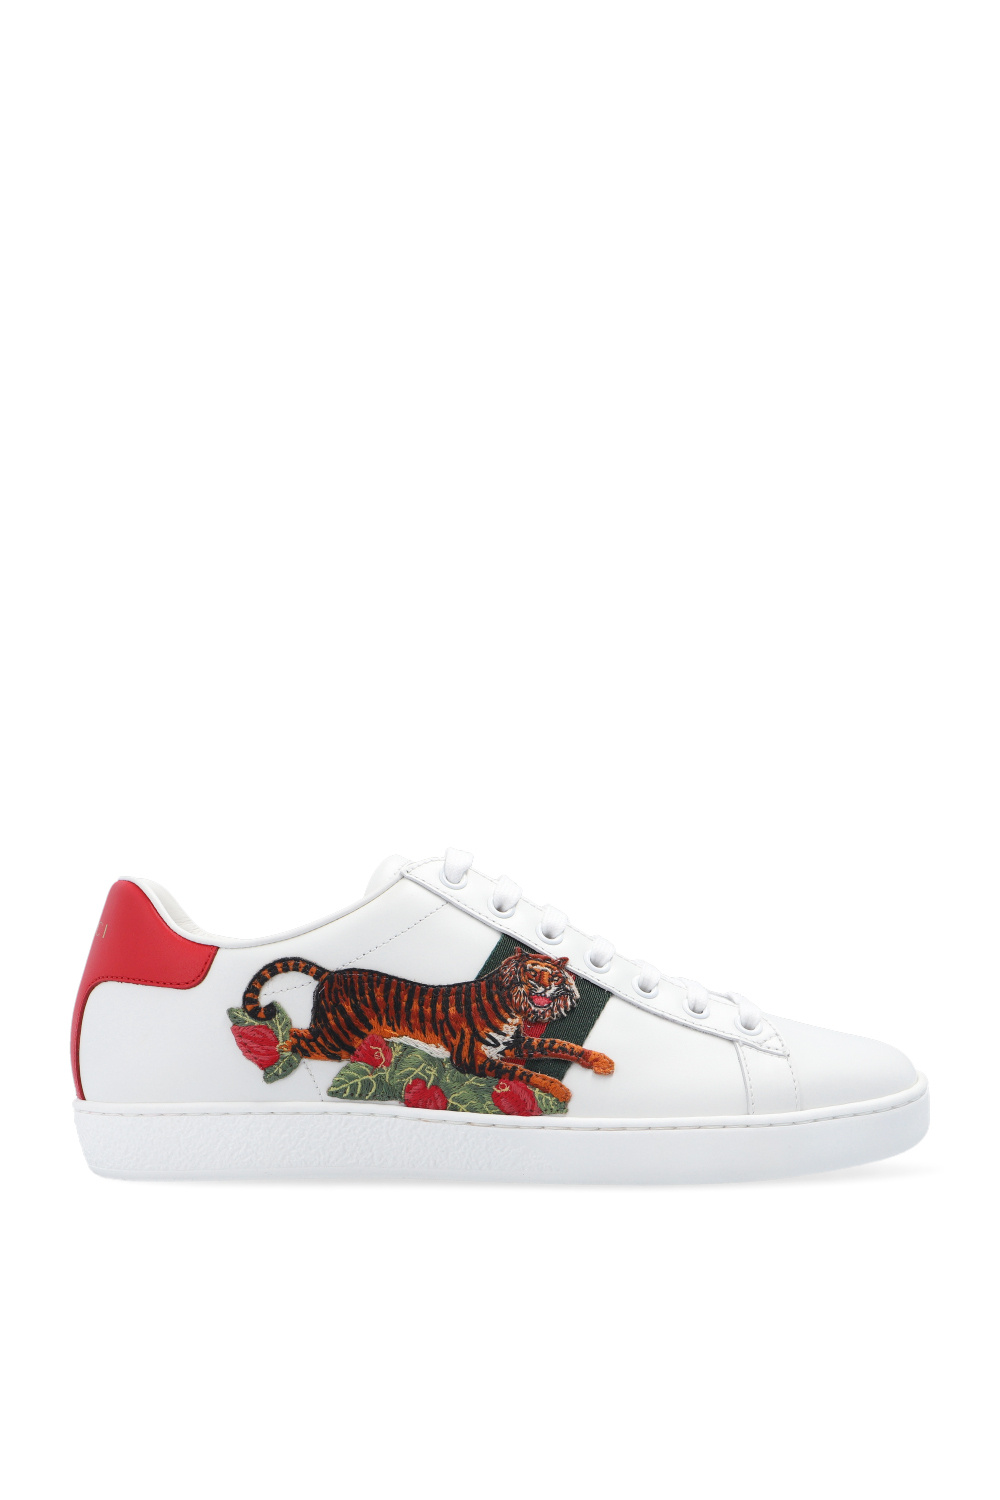 White Sneakers from the 'Gucci Tiger' collection Gucci - IetpShops Canada -  Gucci туфлі р 38-39 оригінал